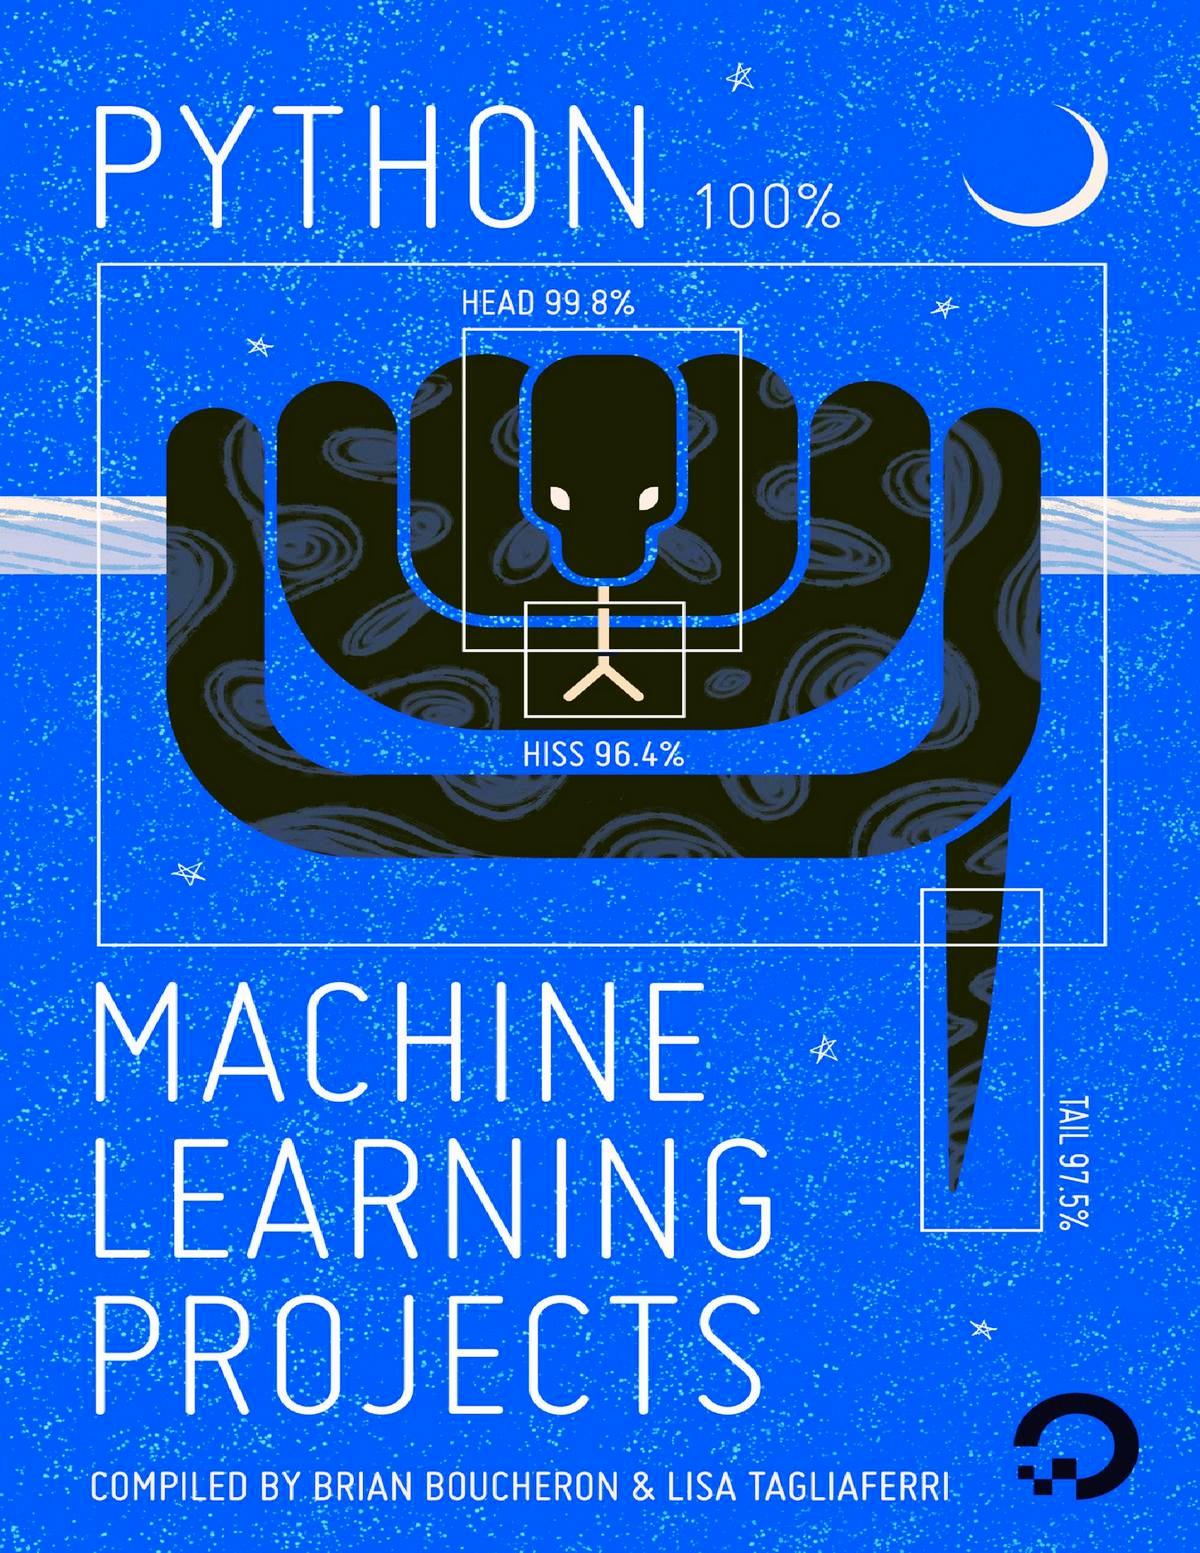 Python Machine Learning Projects pdf free download